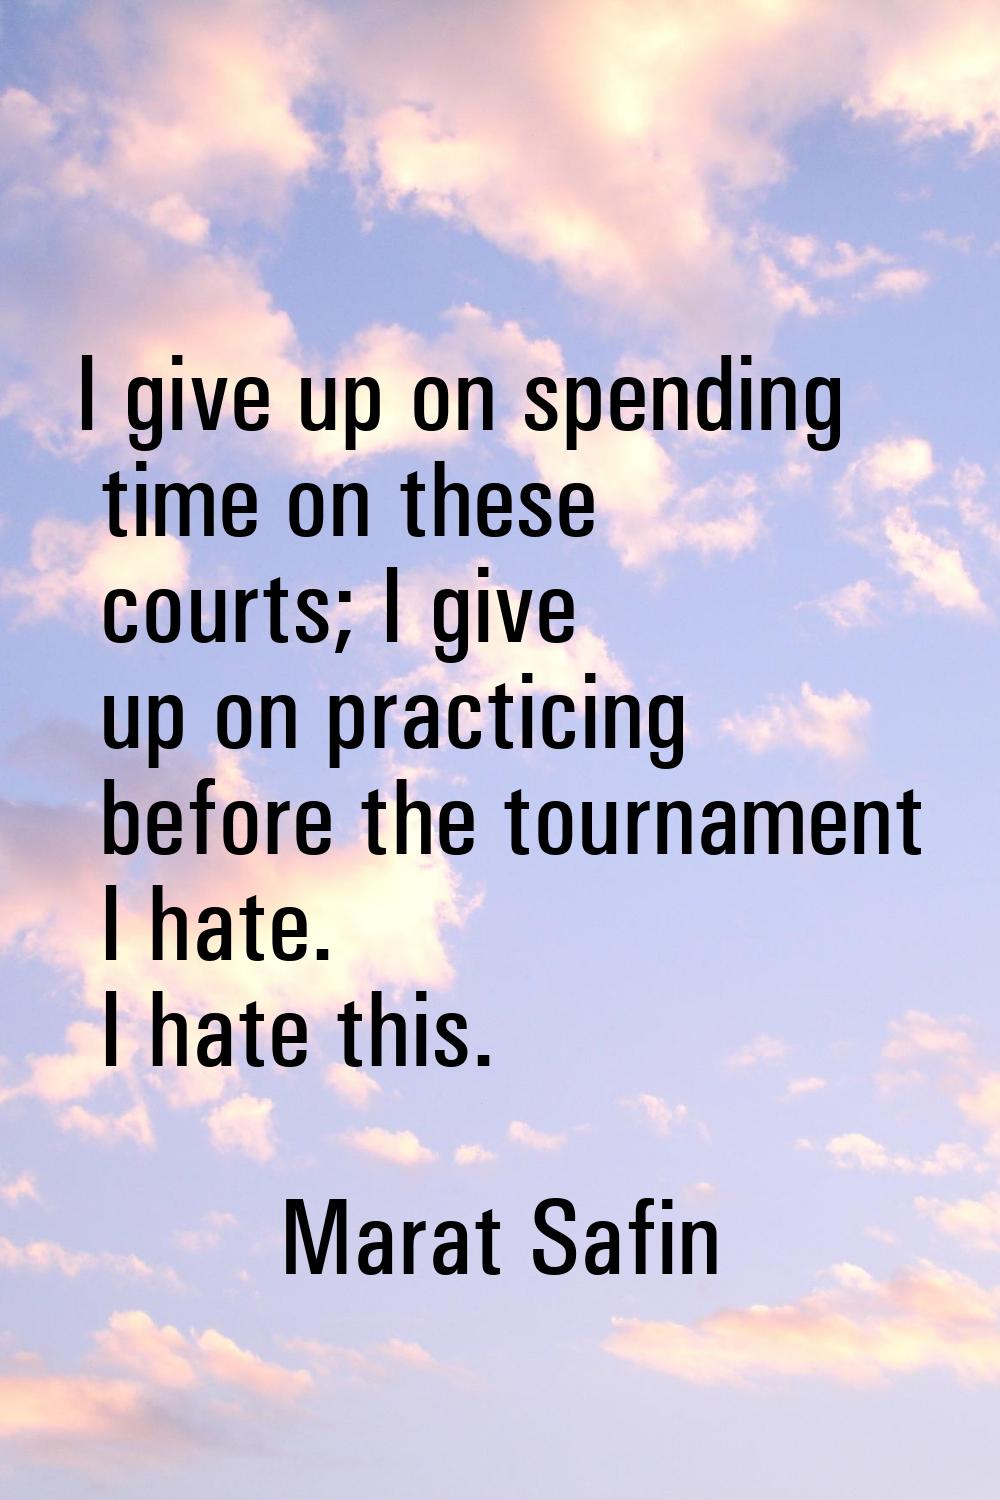 I give up on spending time on these courts; I give up on practicing before the tournament I hate. I